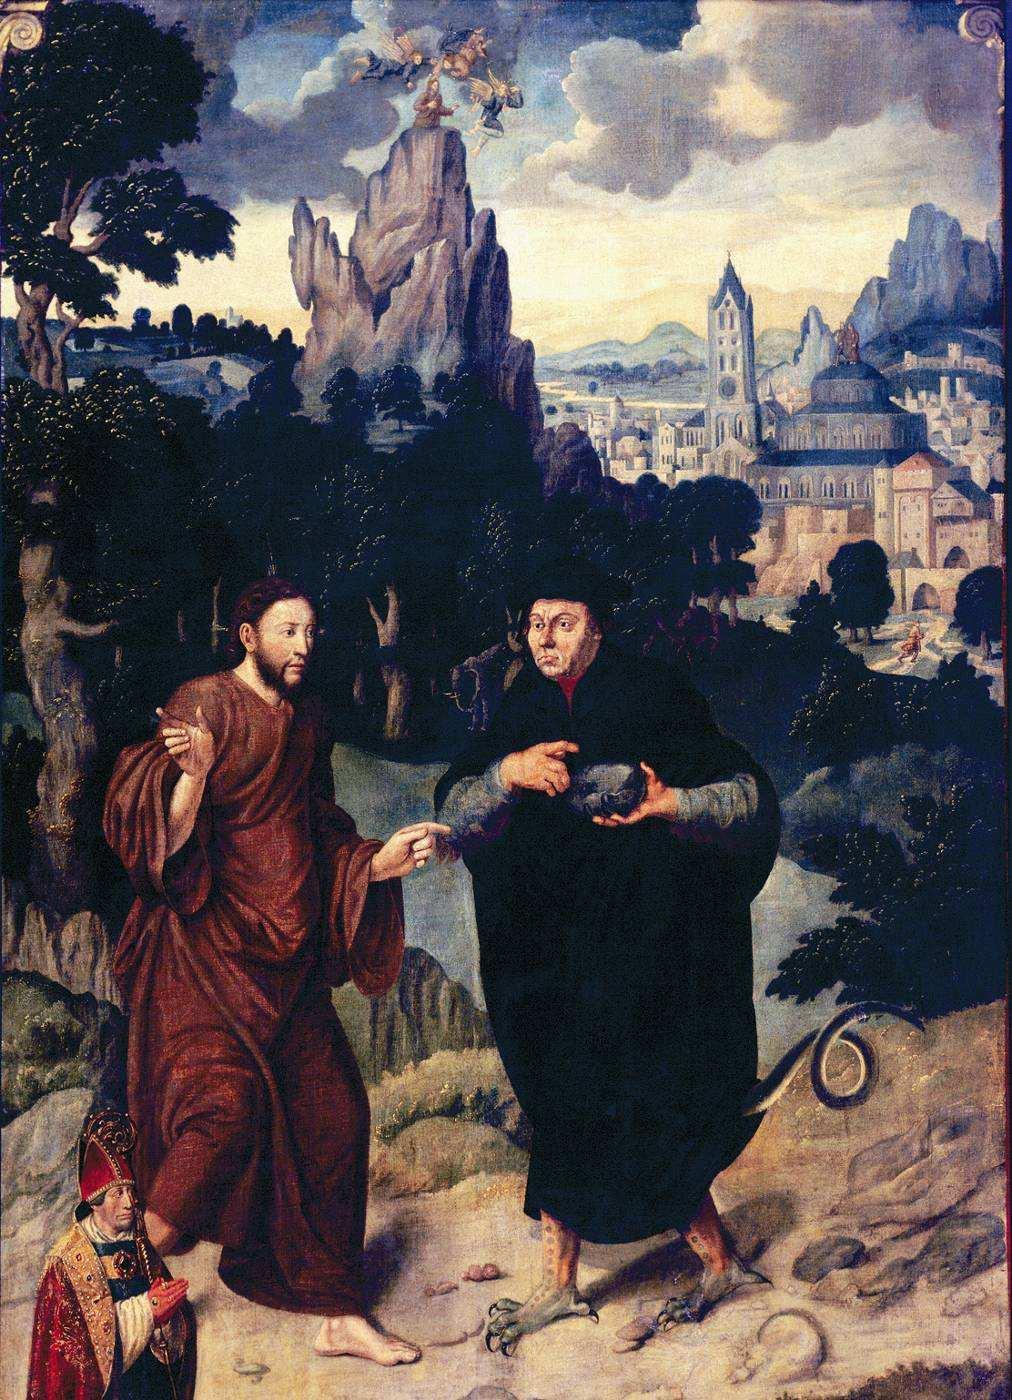 The Swiss Reformation Ulrich Zwingli Humanistically educated, he credited Erasmus as setting him on the path to reform.